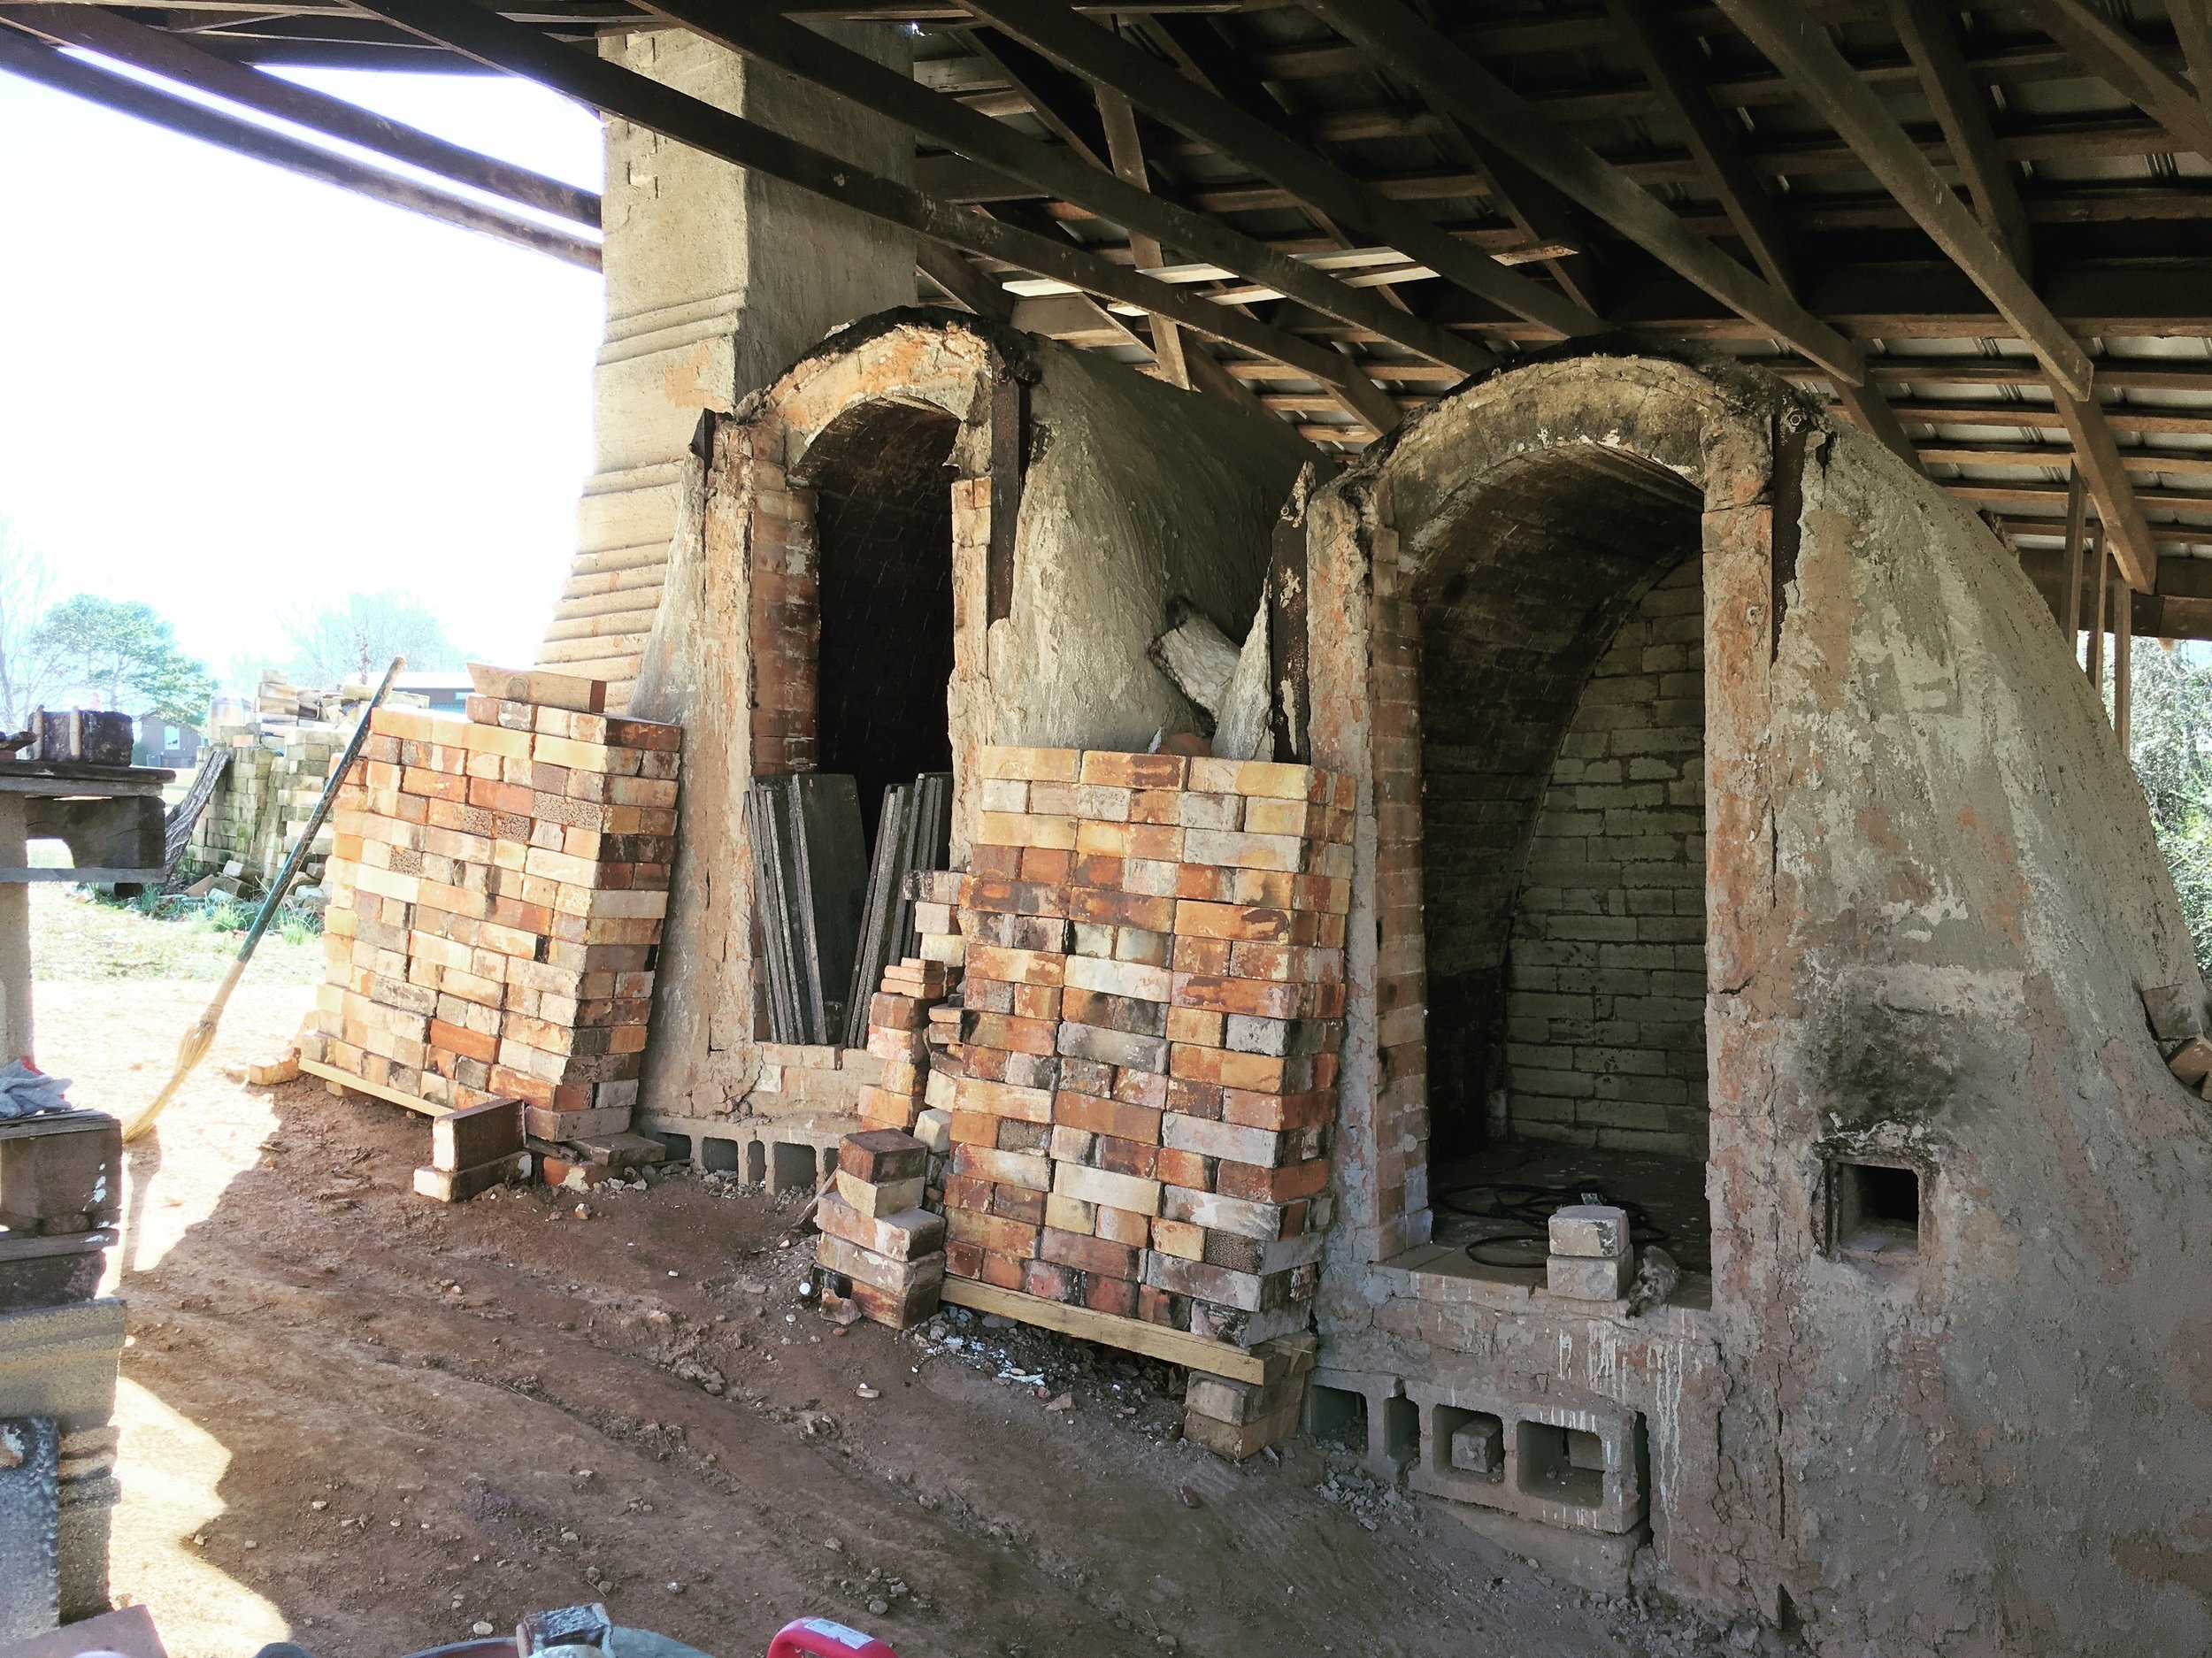  Kiln prep requires the shelves and furniture to be clean to ensure an even level floor and stack. &nbsp;We also check the interior of the kiln for any build up of salt or wadding material. &nbsp; 